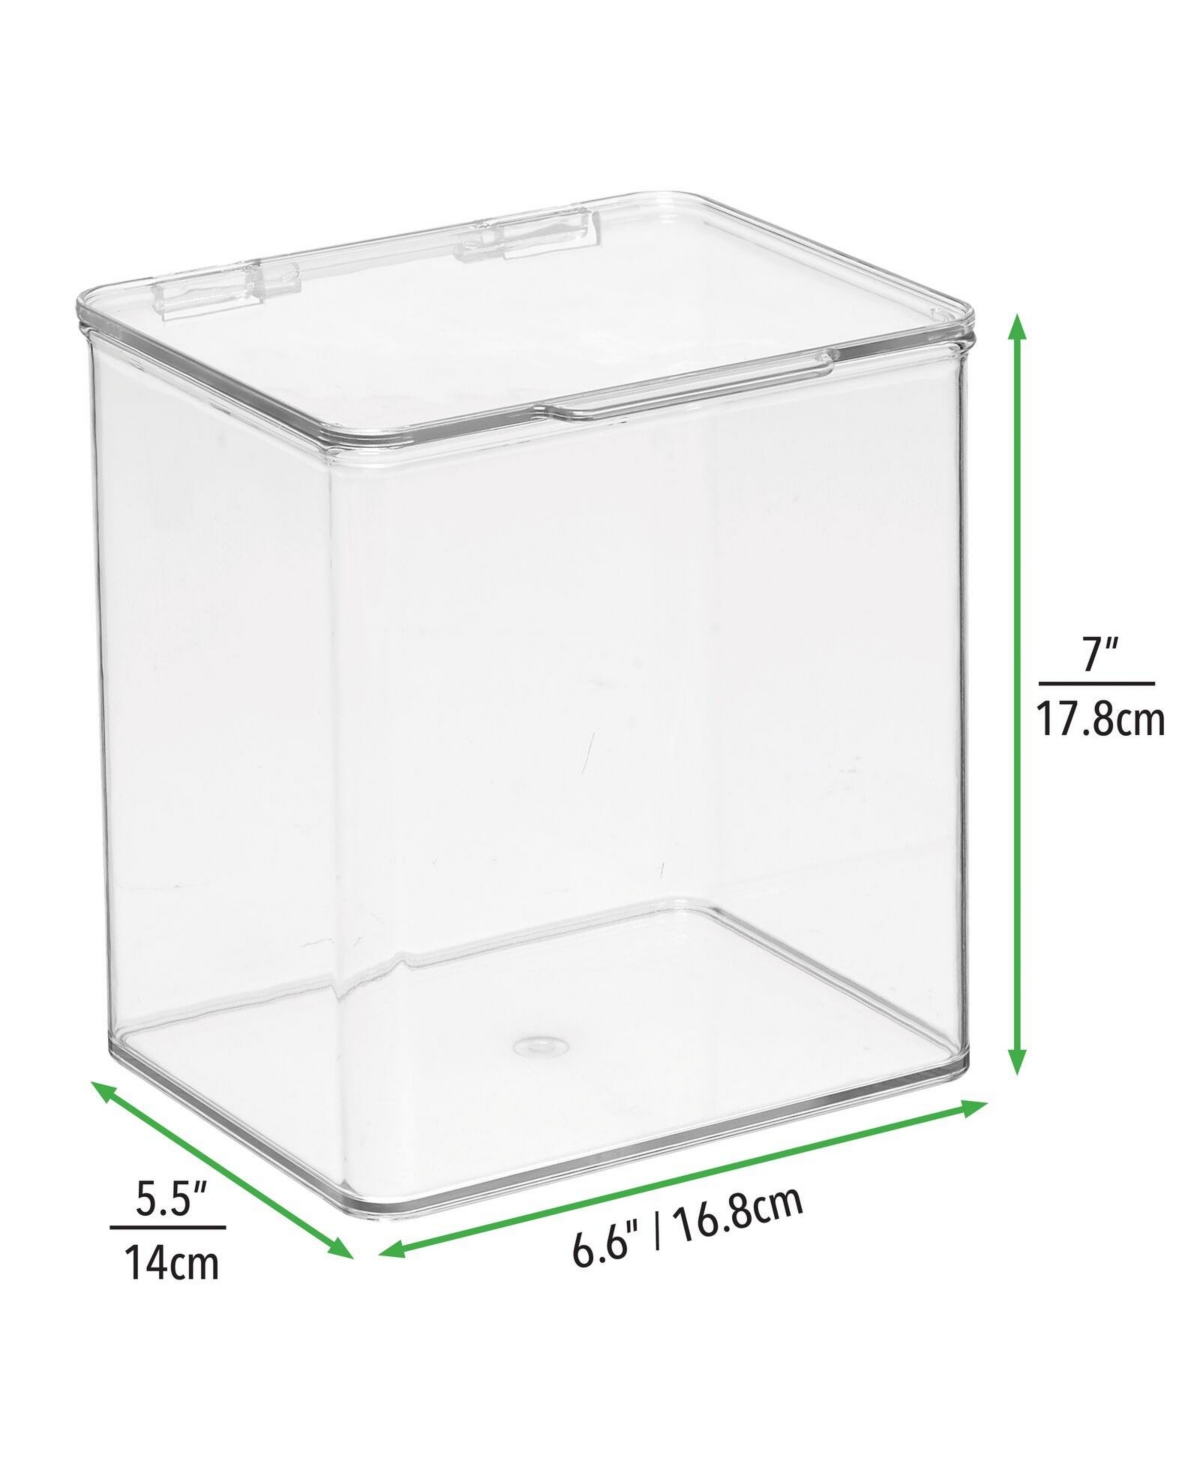 mDesign Plastic Home Office Storage Organizer Bin Box, Hinged Lid, 2 Pack, Clear - Clear